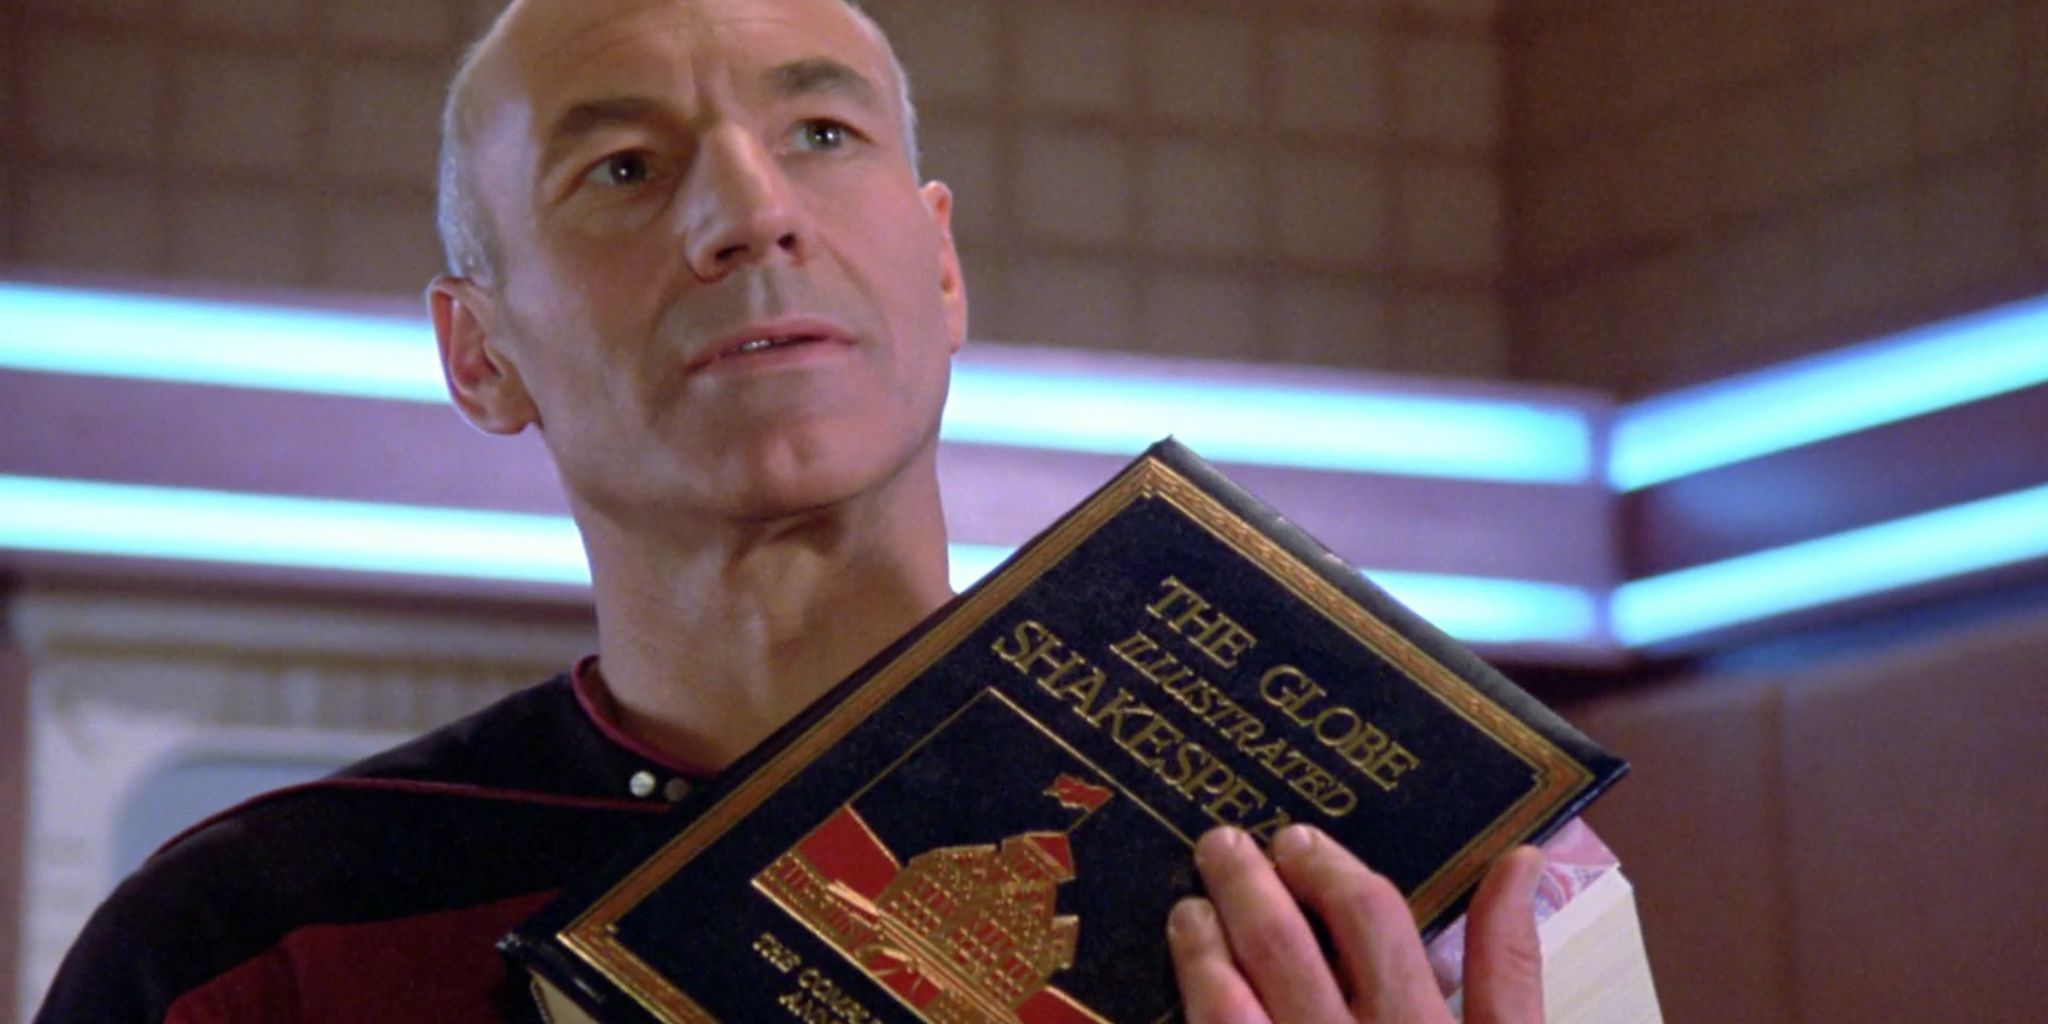 Picard and his Shakespeare